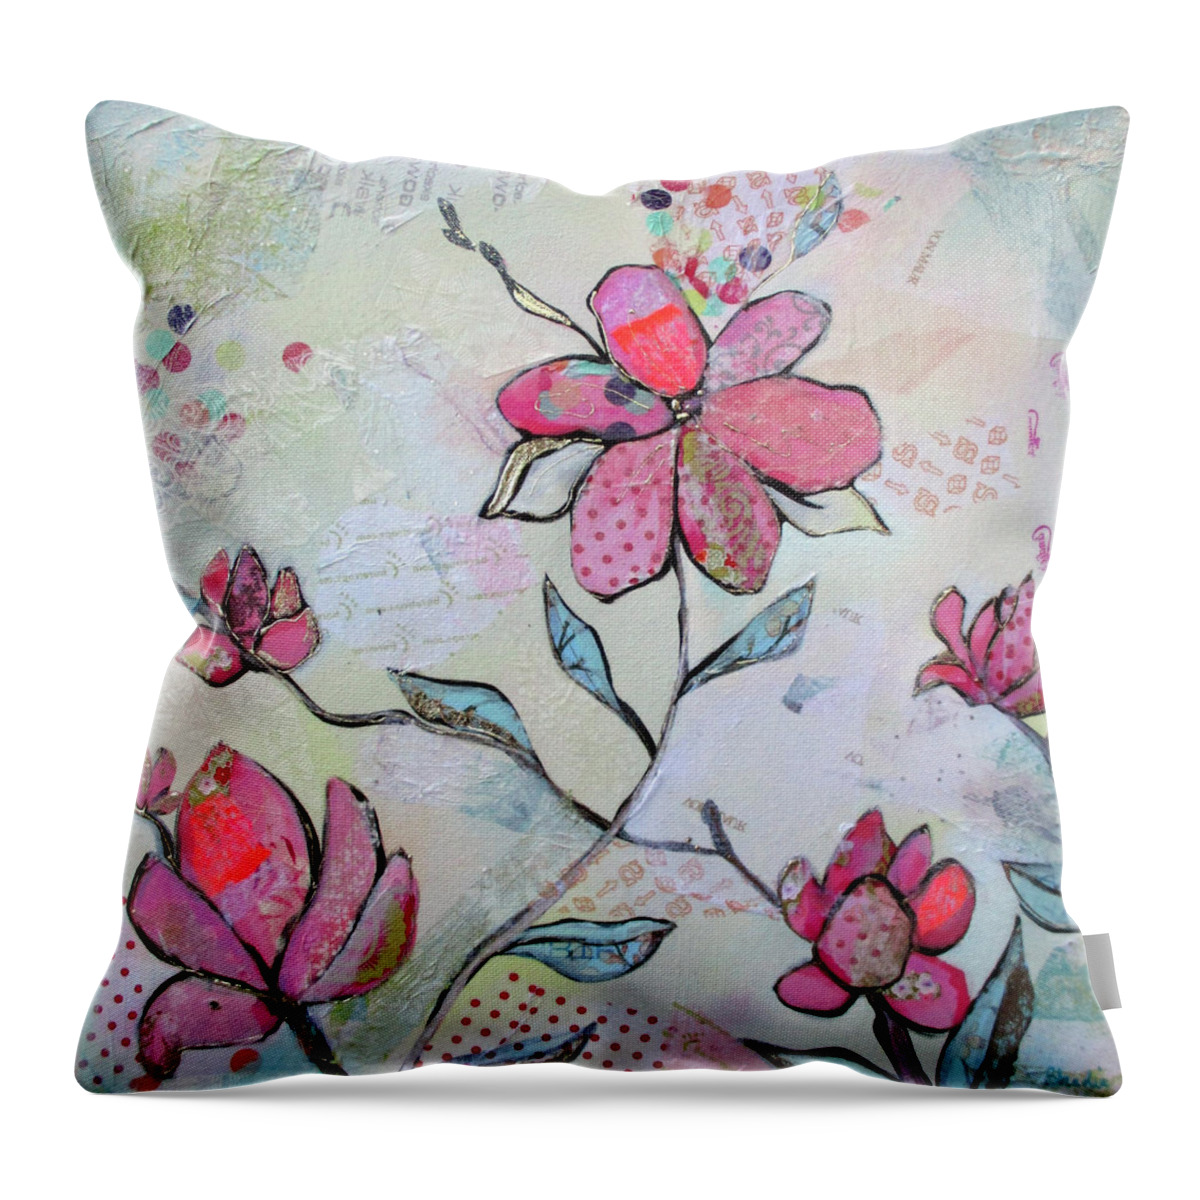 Pink Throw Pillow featuring the painting Spring Reverie II by Shadia Derbyshire